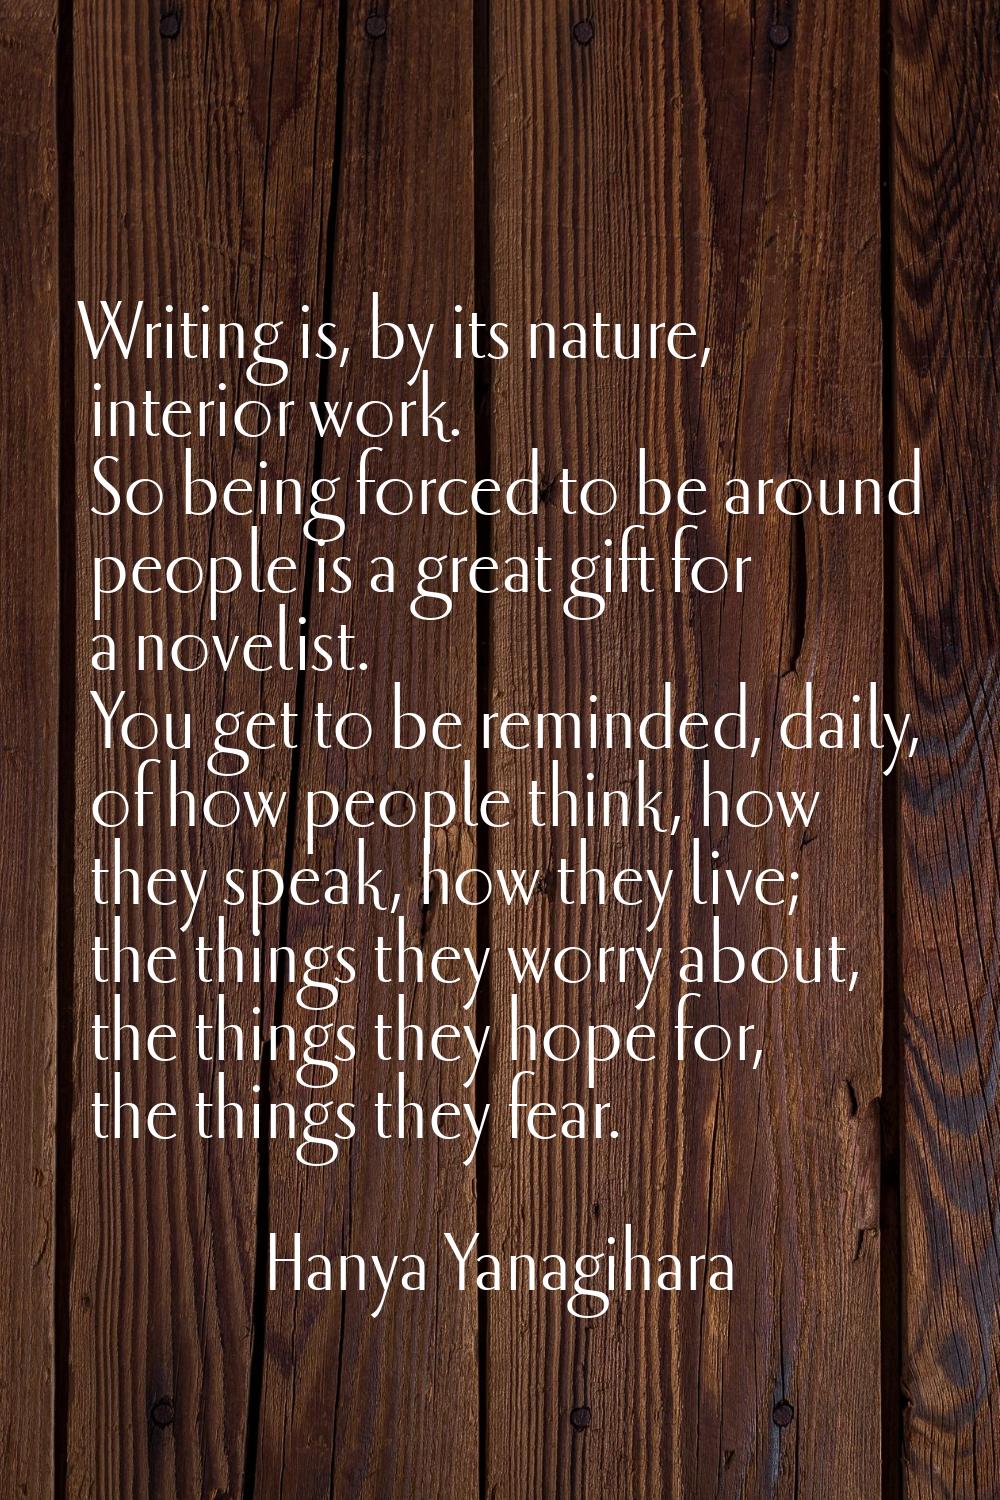 Writing is, by its nature, interior work. So being forced to be around people is a great gift for a